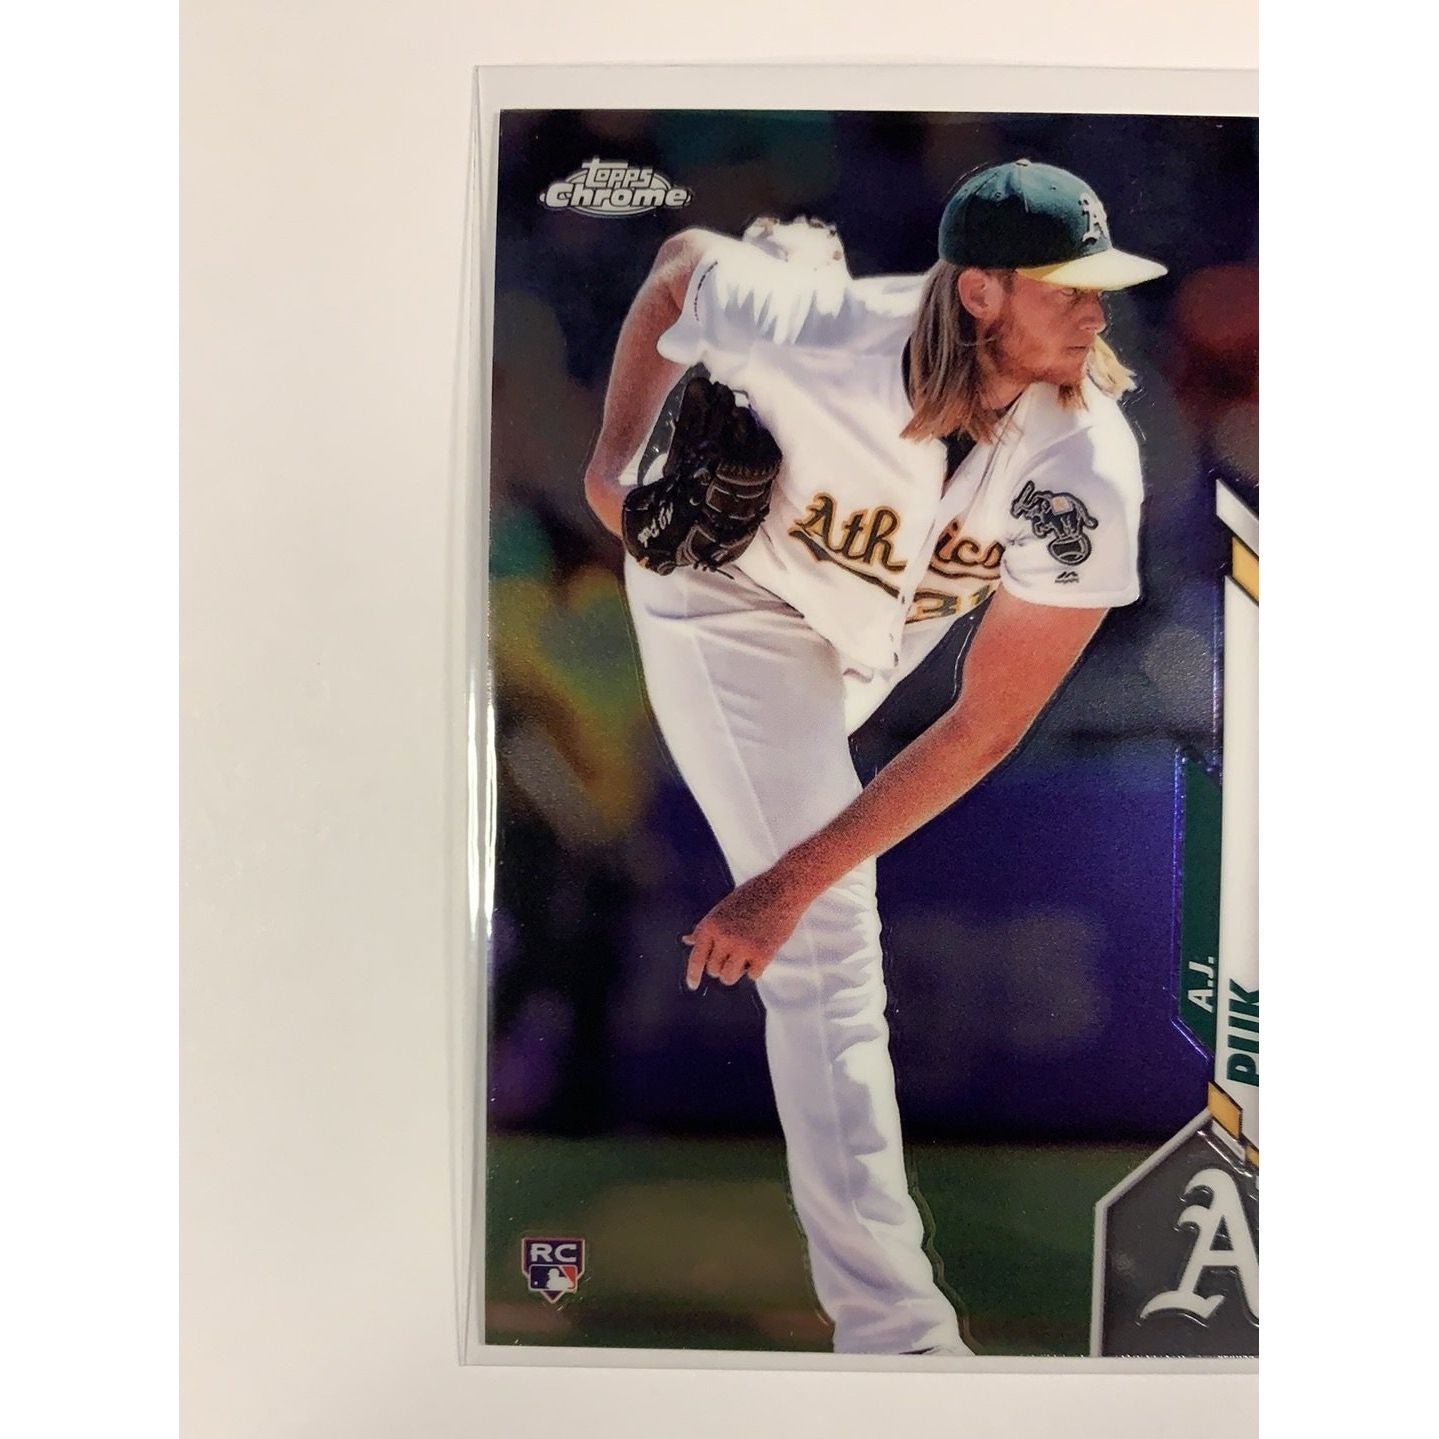  2020 Topps Chrome A.J. Puk RC  Local Legends Cards & Collectibles